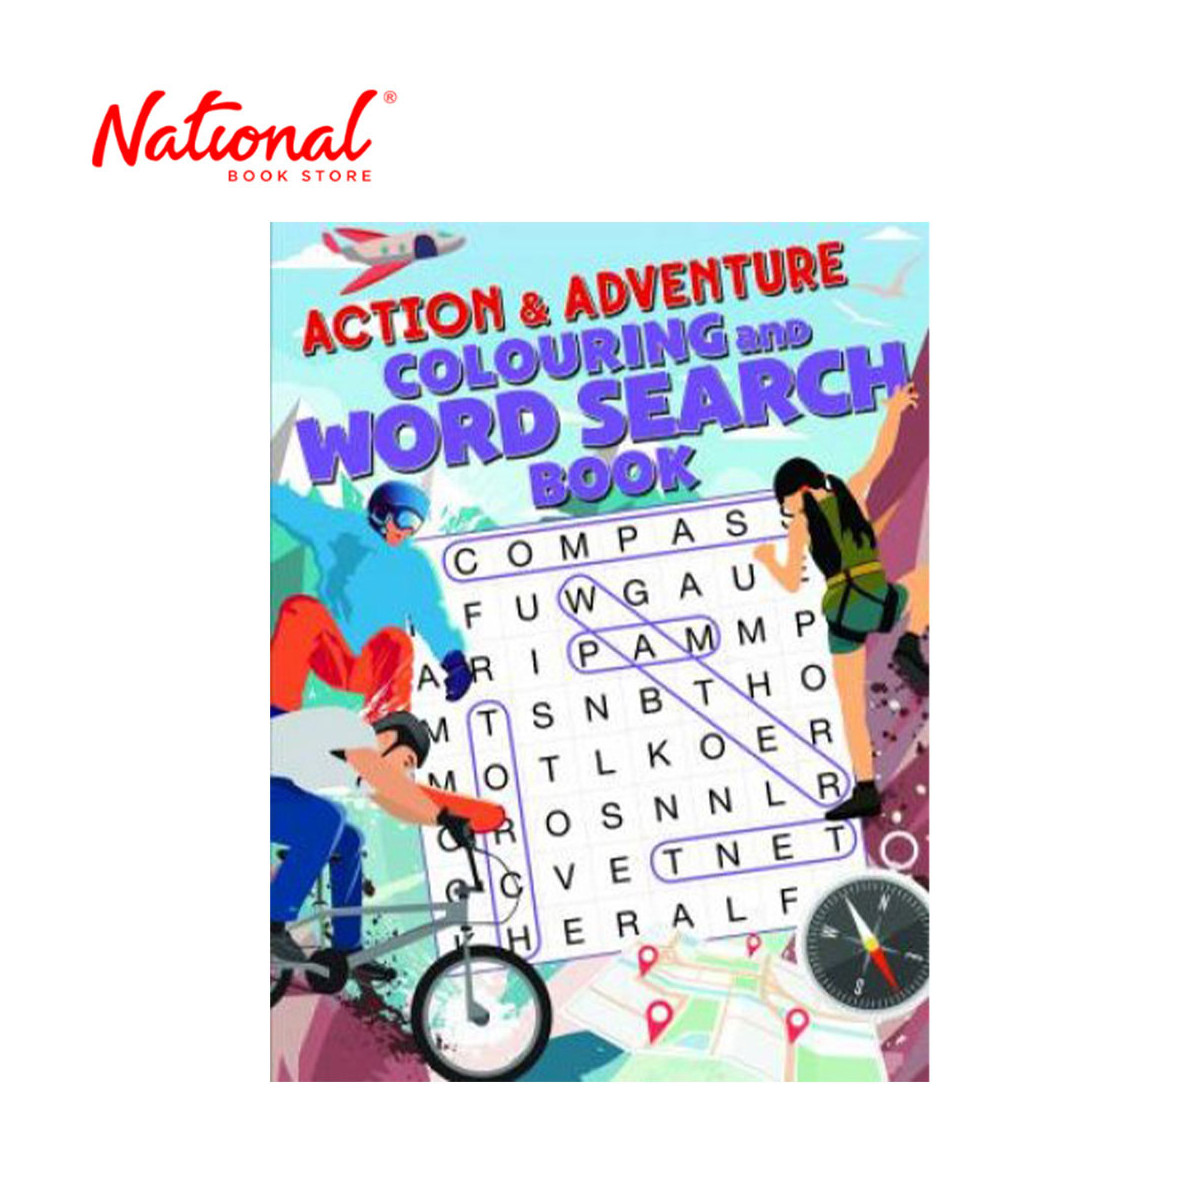 Action & Adventure Coloring And Word Search Book by Lake Press - Trade Paperback - Children's